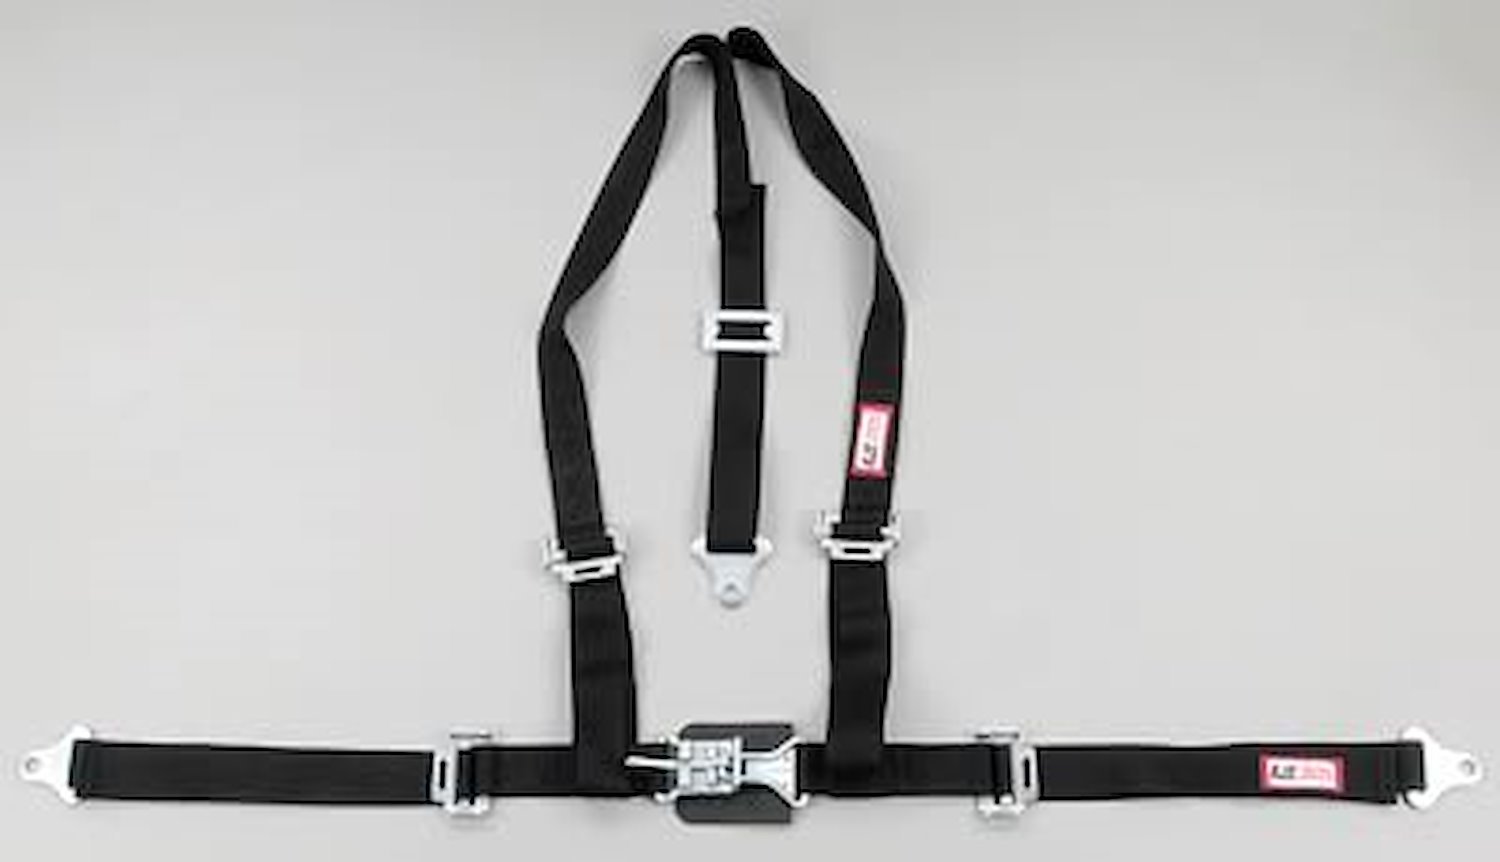 NON-SFI L&L HARNESS 3 PULL DOWN Lap Belt w/adjuster SNAP 2 S.H. Individual ROLL BAR Mount WRAP/BOLT RED